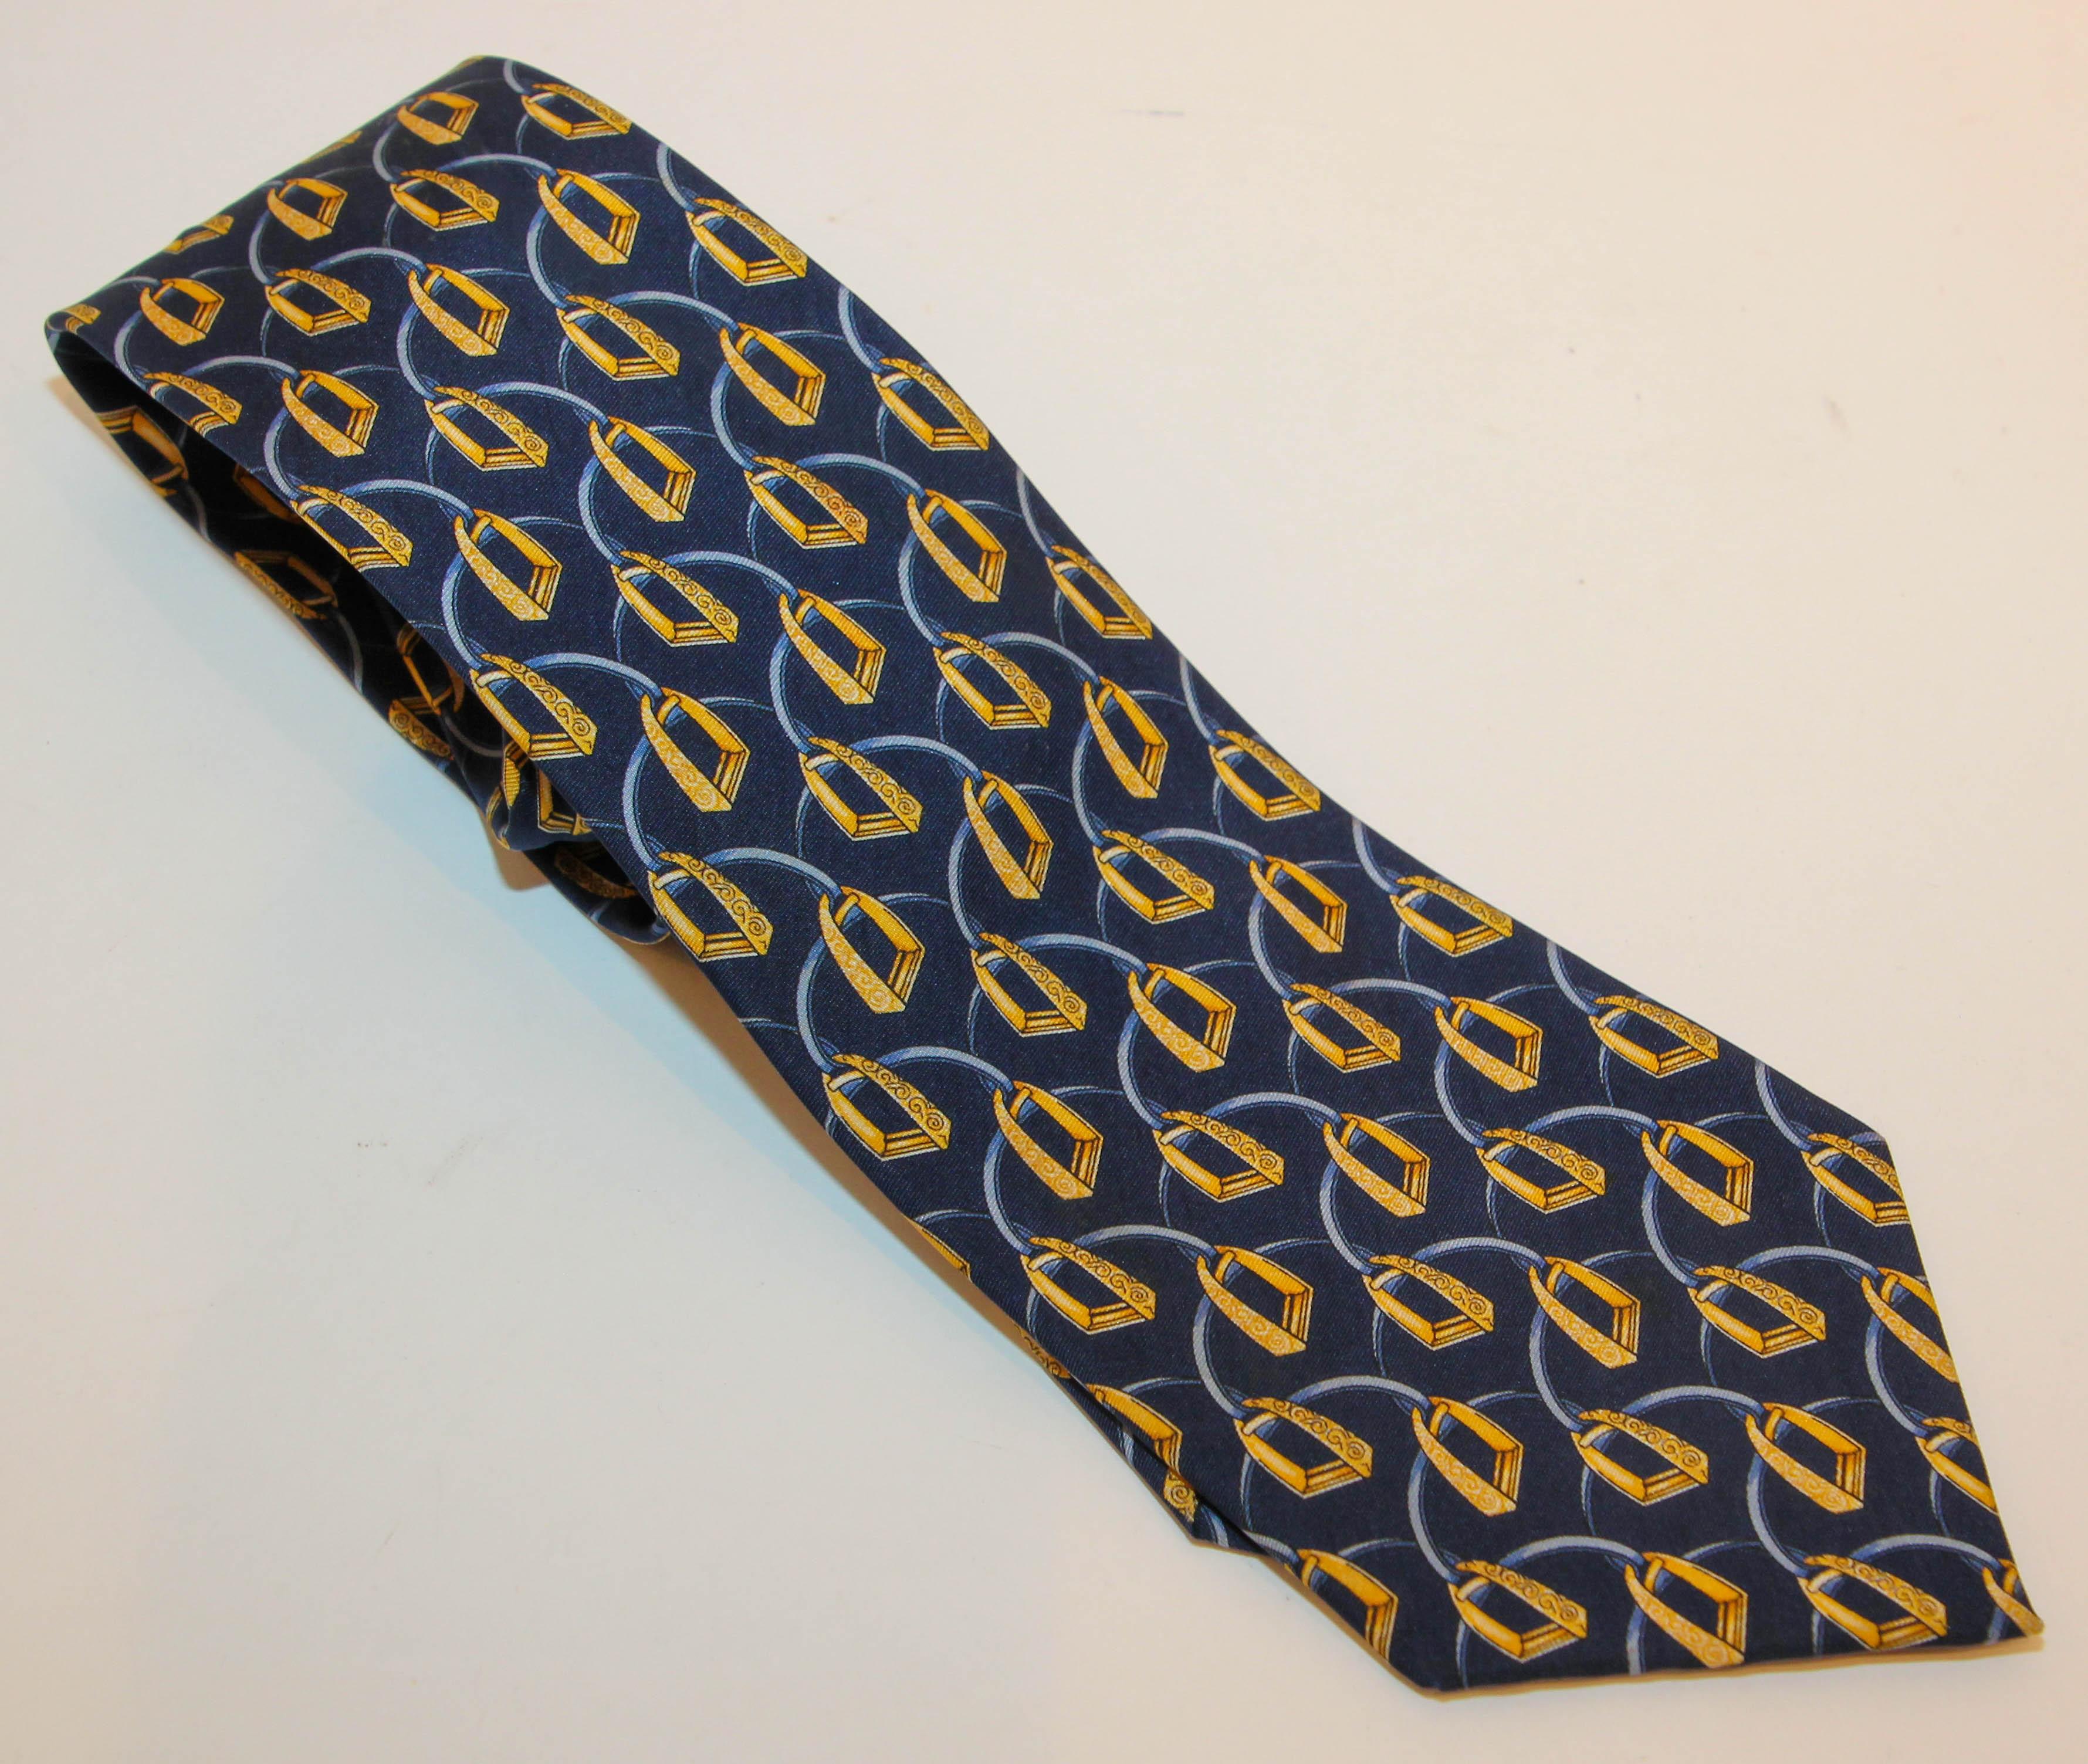 Celine Paris Silk Neck Tie Navy Blue and Gold Equestrian design.
Celine neck tie comes in a navy and gold equestrian silk. 
Men's silk neck tie.
100% silk fabric. 
Made in France.
Condition: Excellent
There are no visible signs of wear, and it is